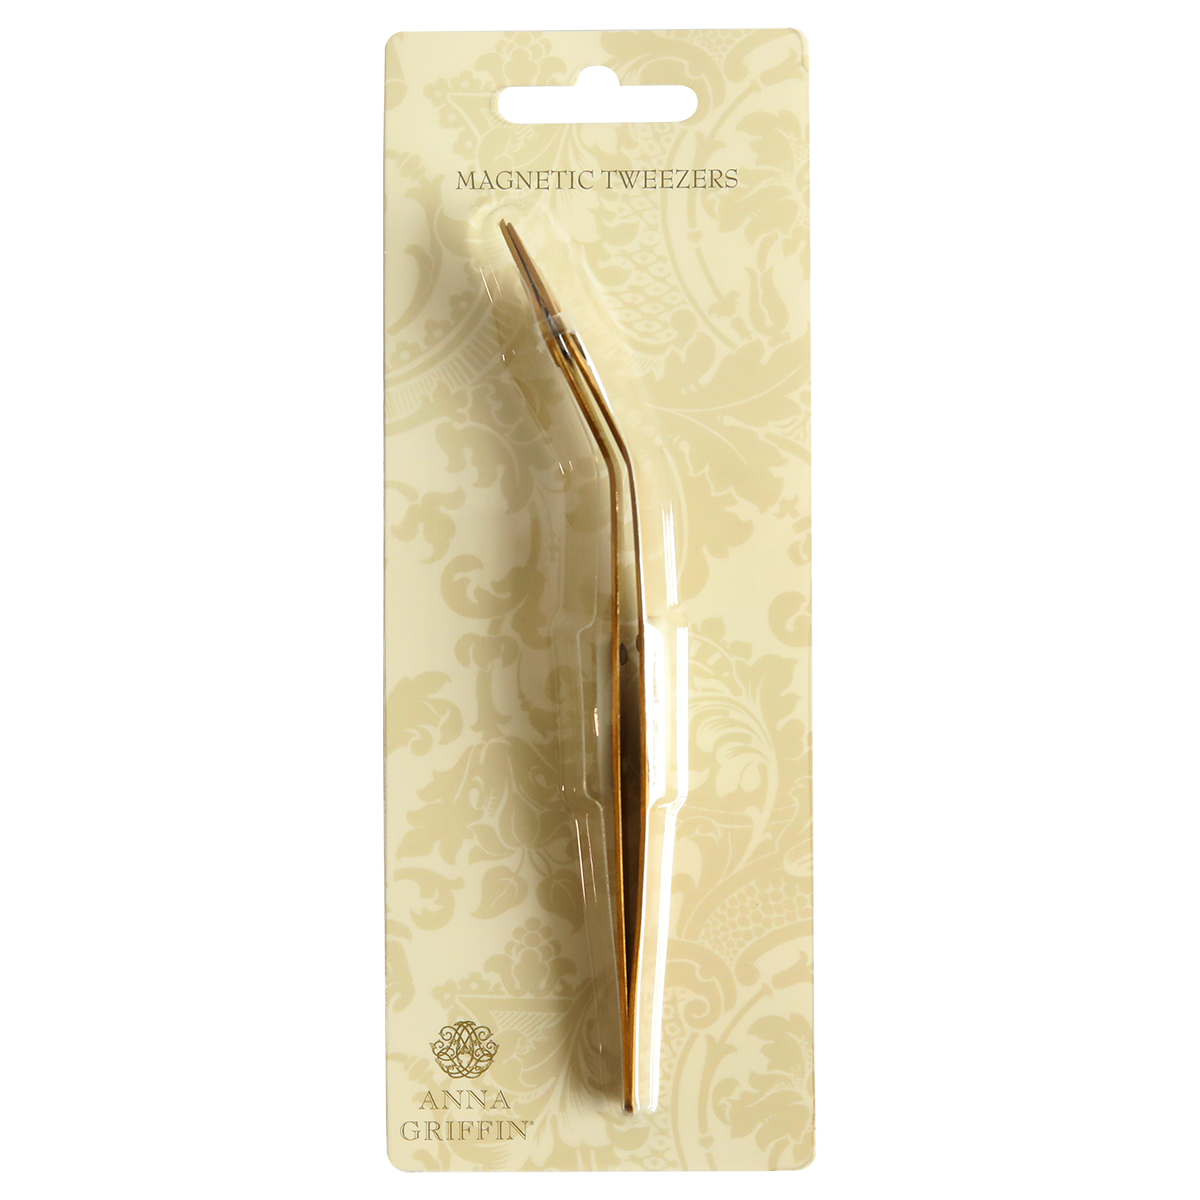 A gold plated Magnetic Tweezers in a package.